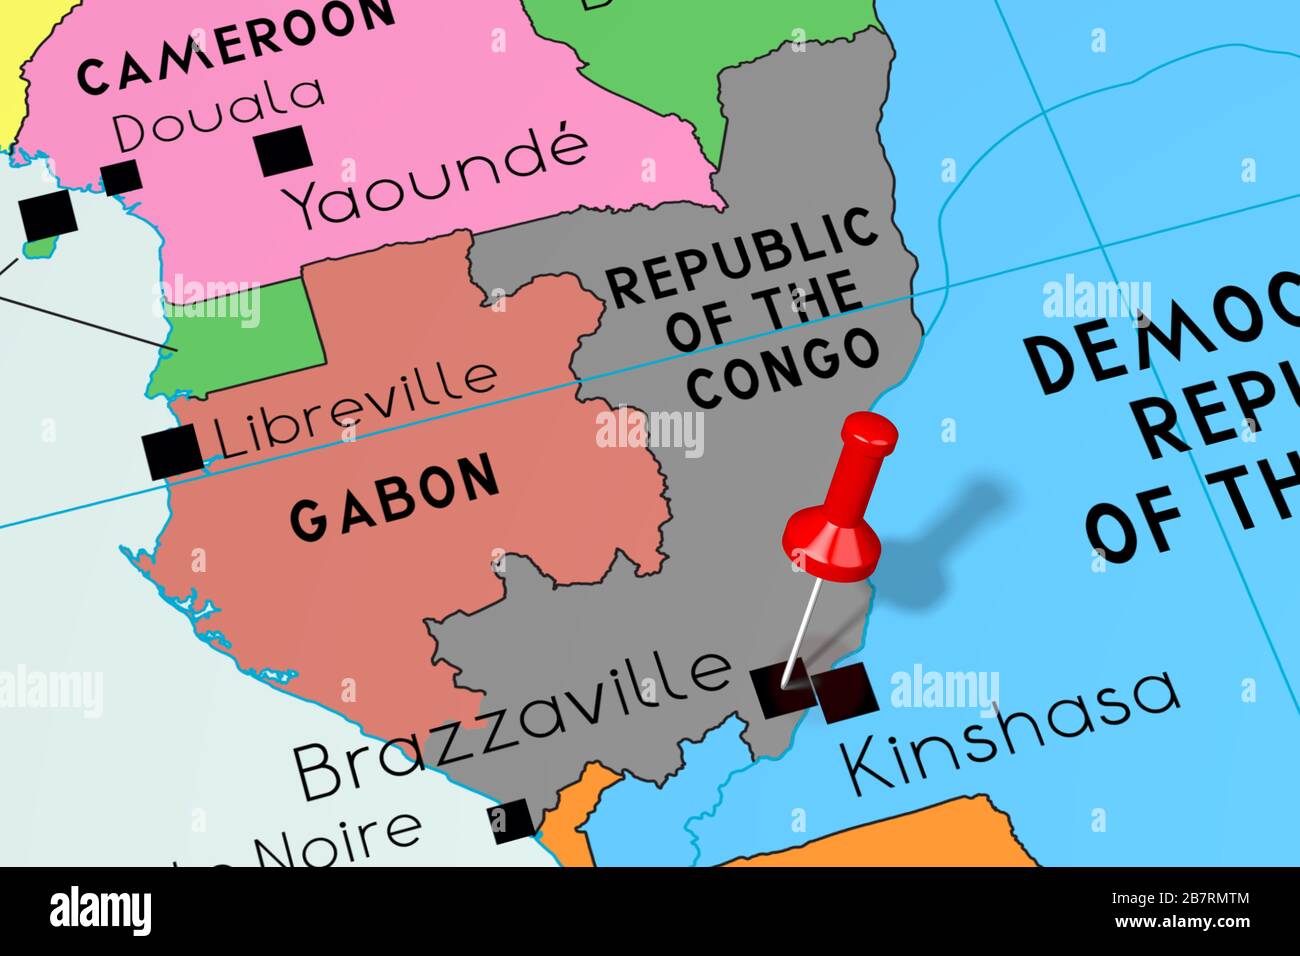 Republic of the Congo, Brazzaville - capital city, pinned on political map Stock Photo